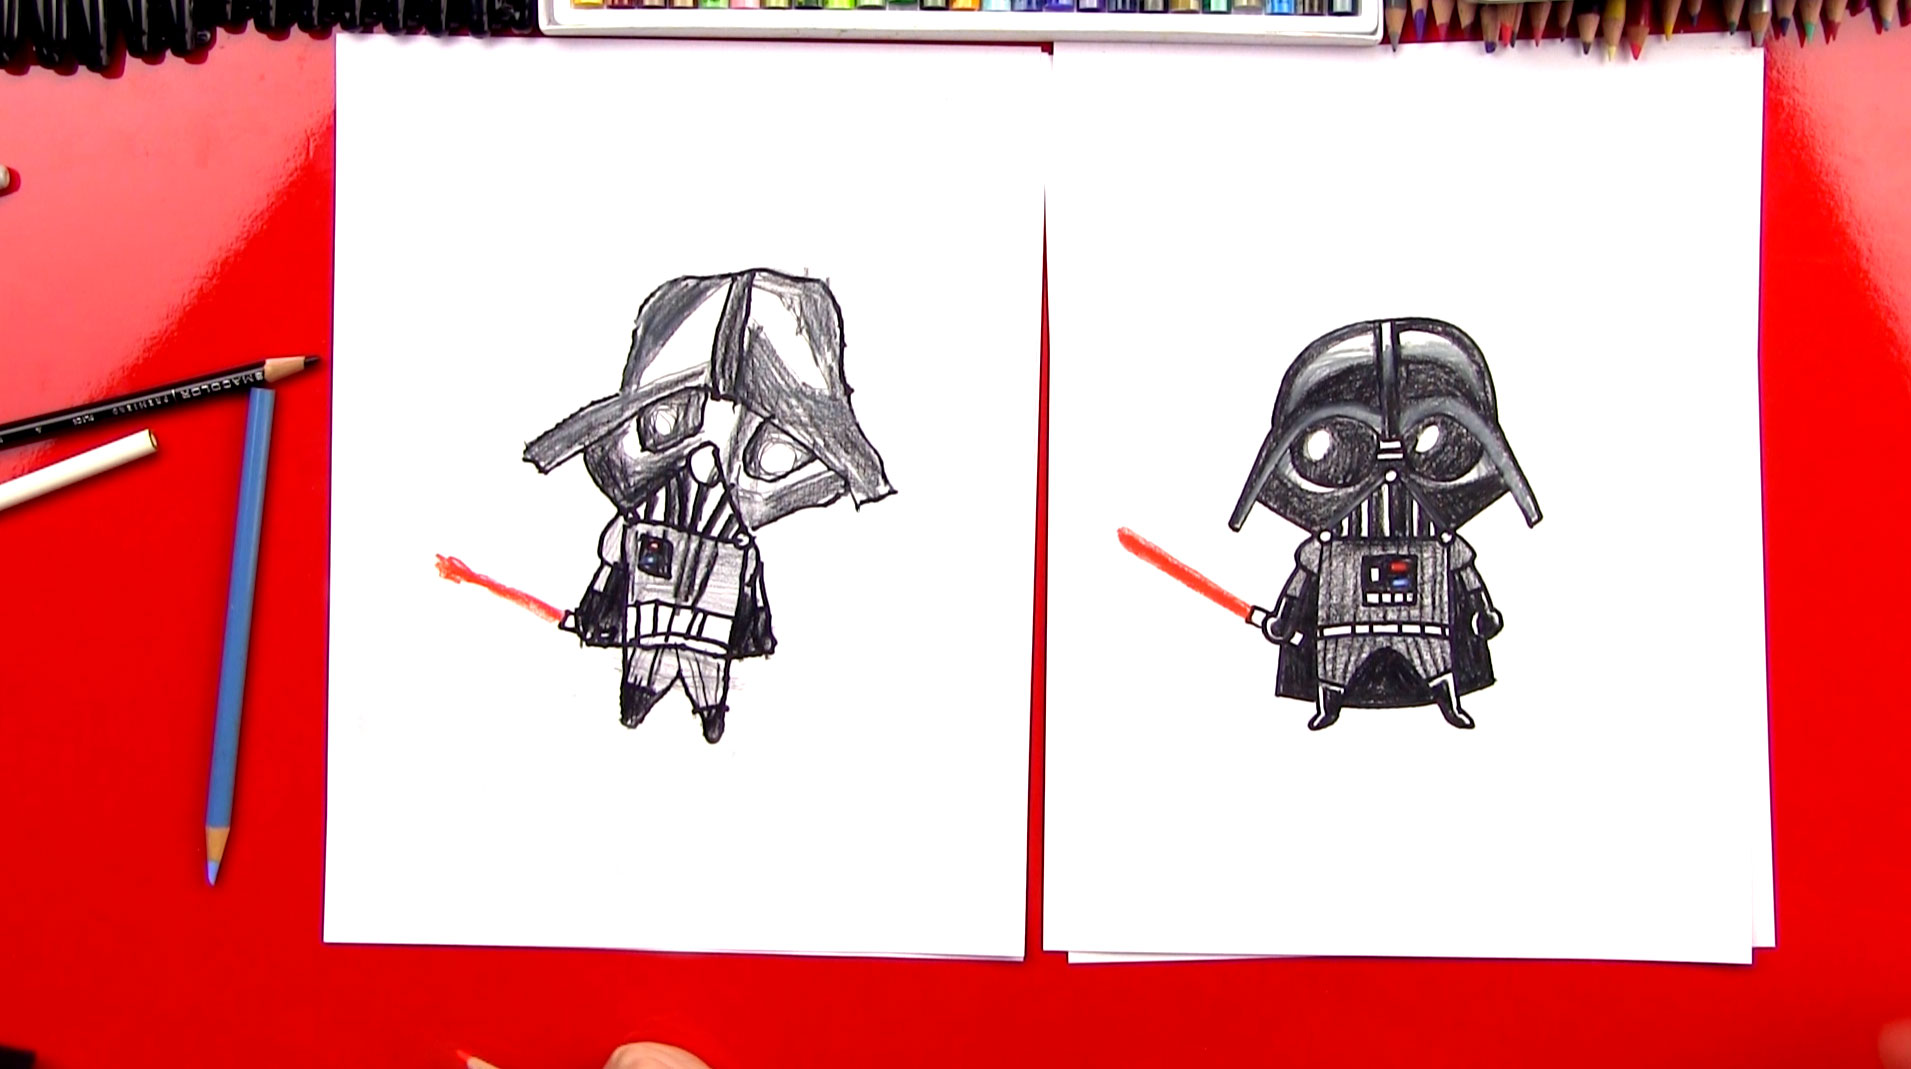 How To Draw A Cartoon Darth Vader - Art For Kids Hub